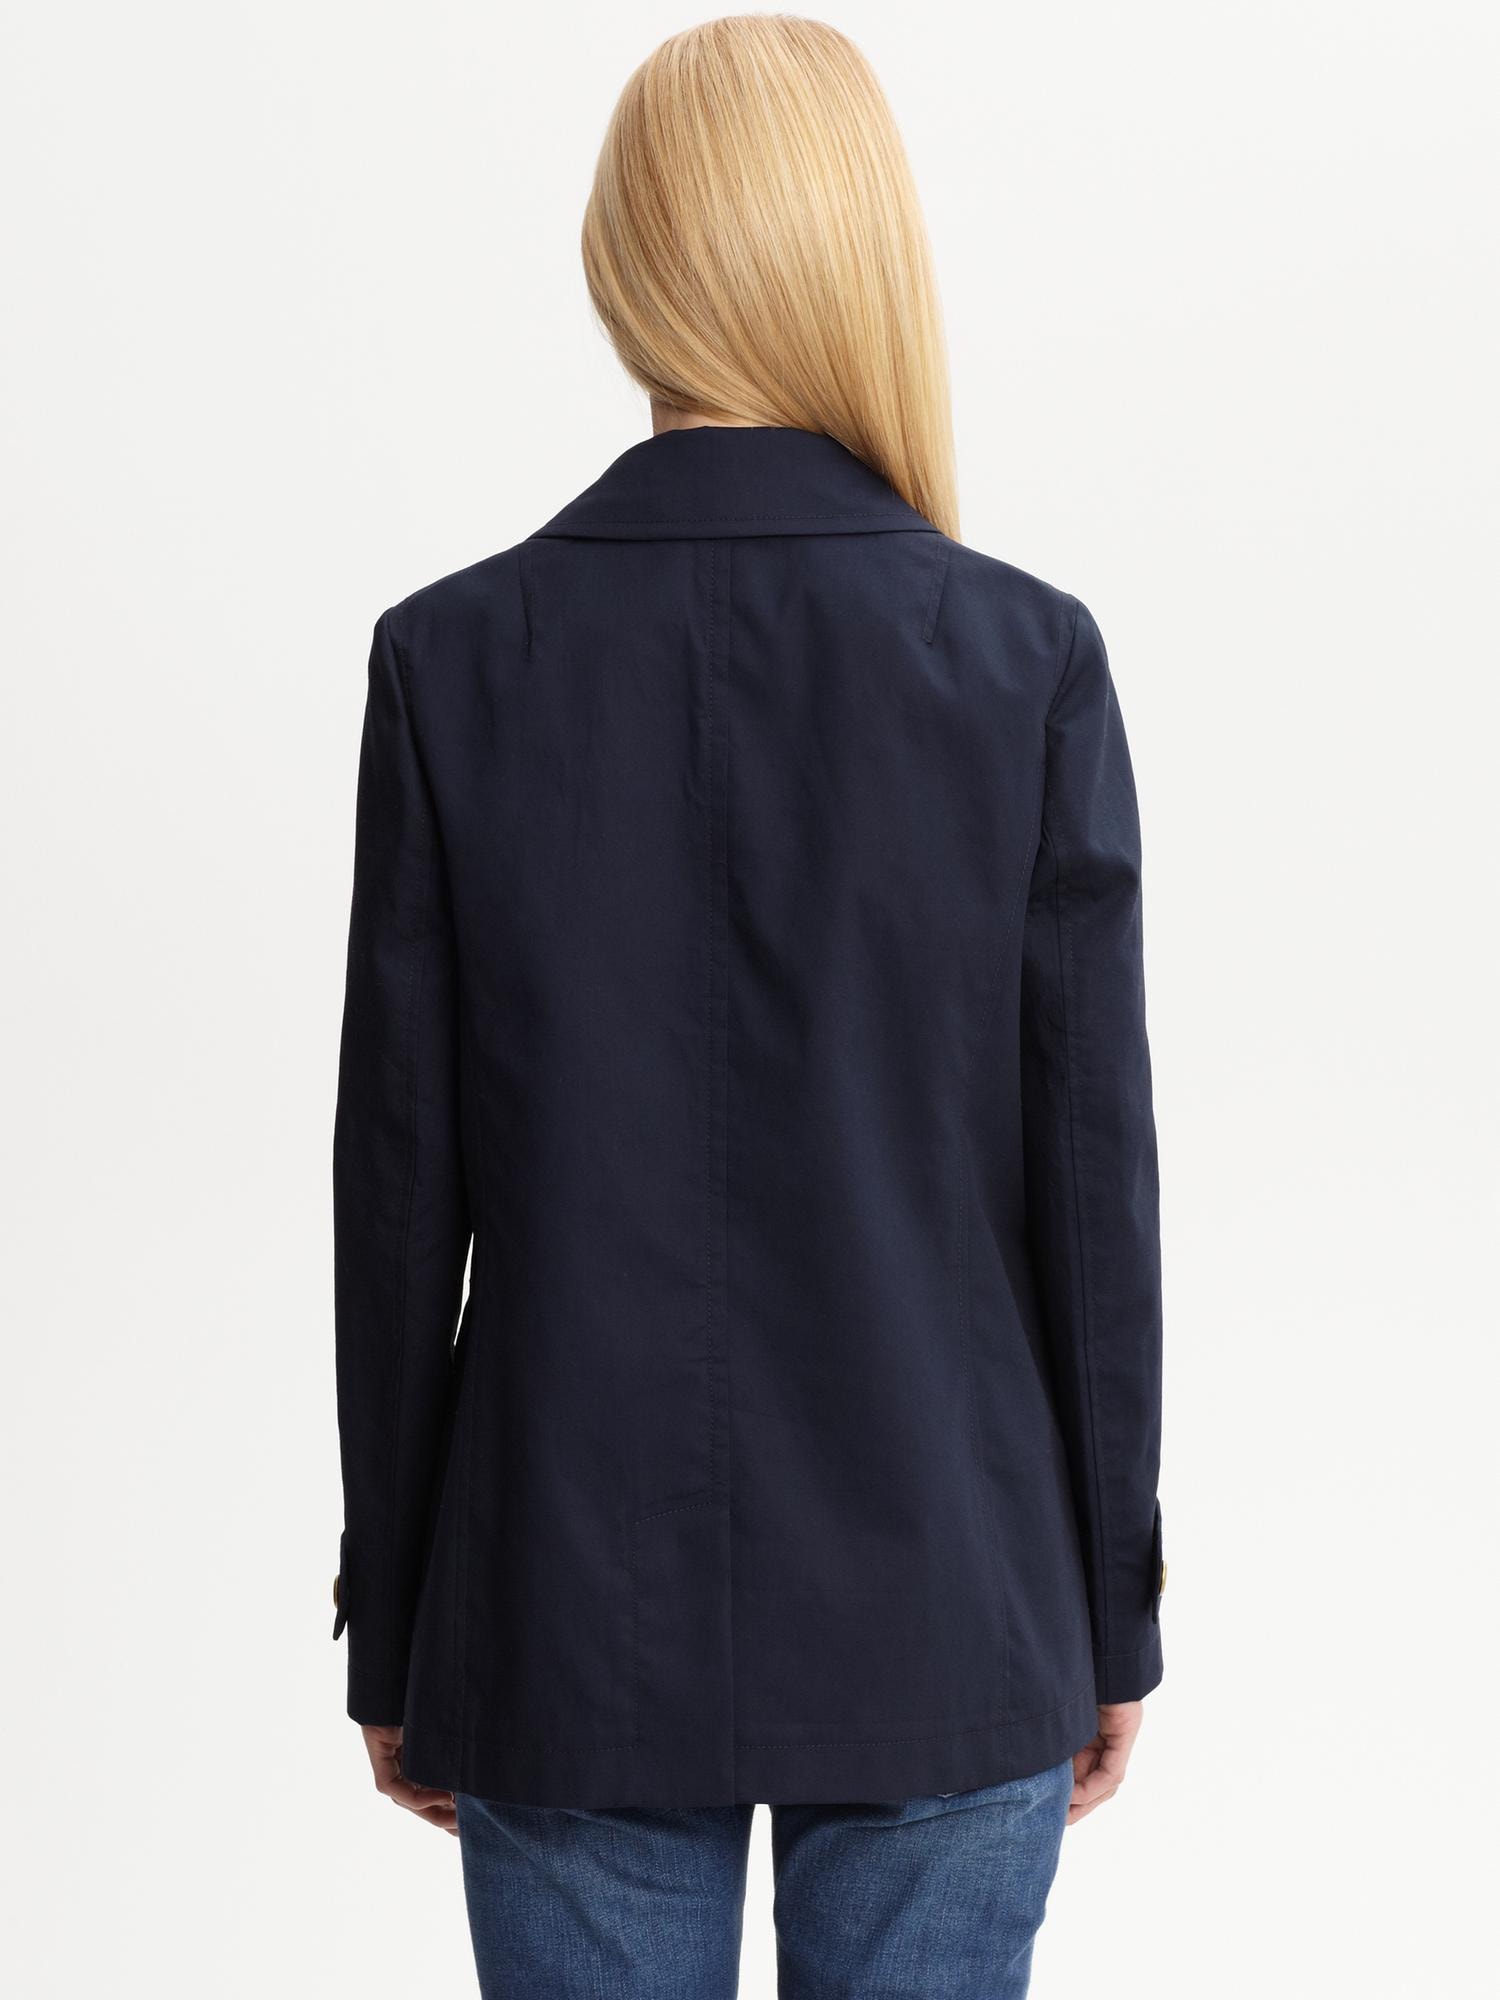 Navy double-breasted peacoat